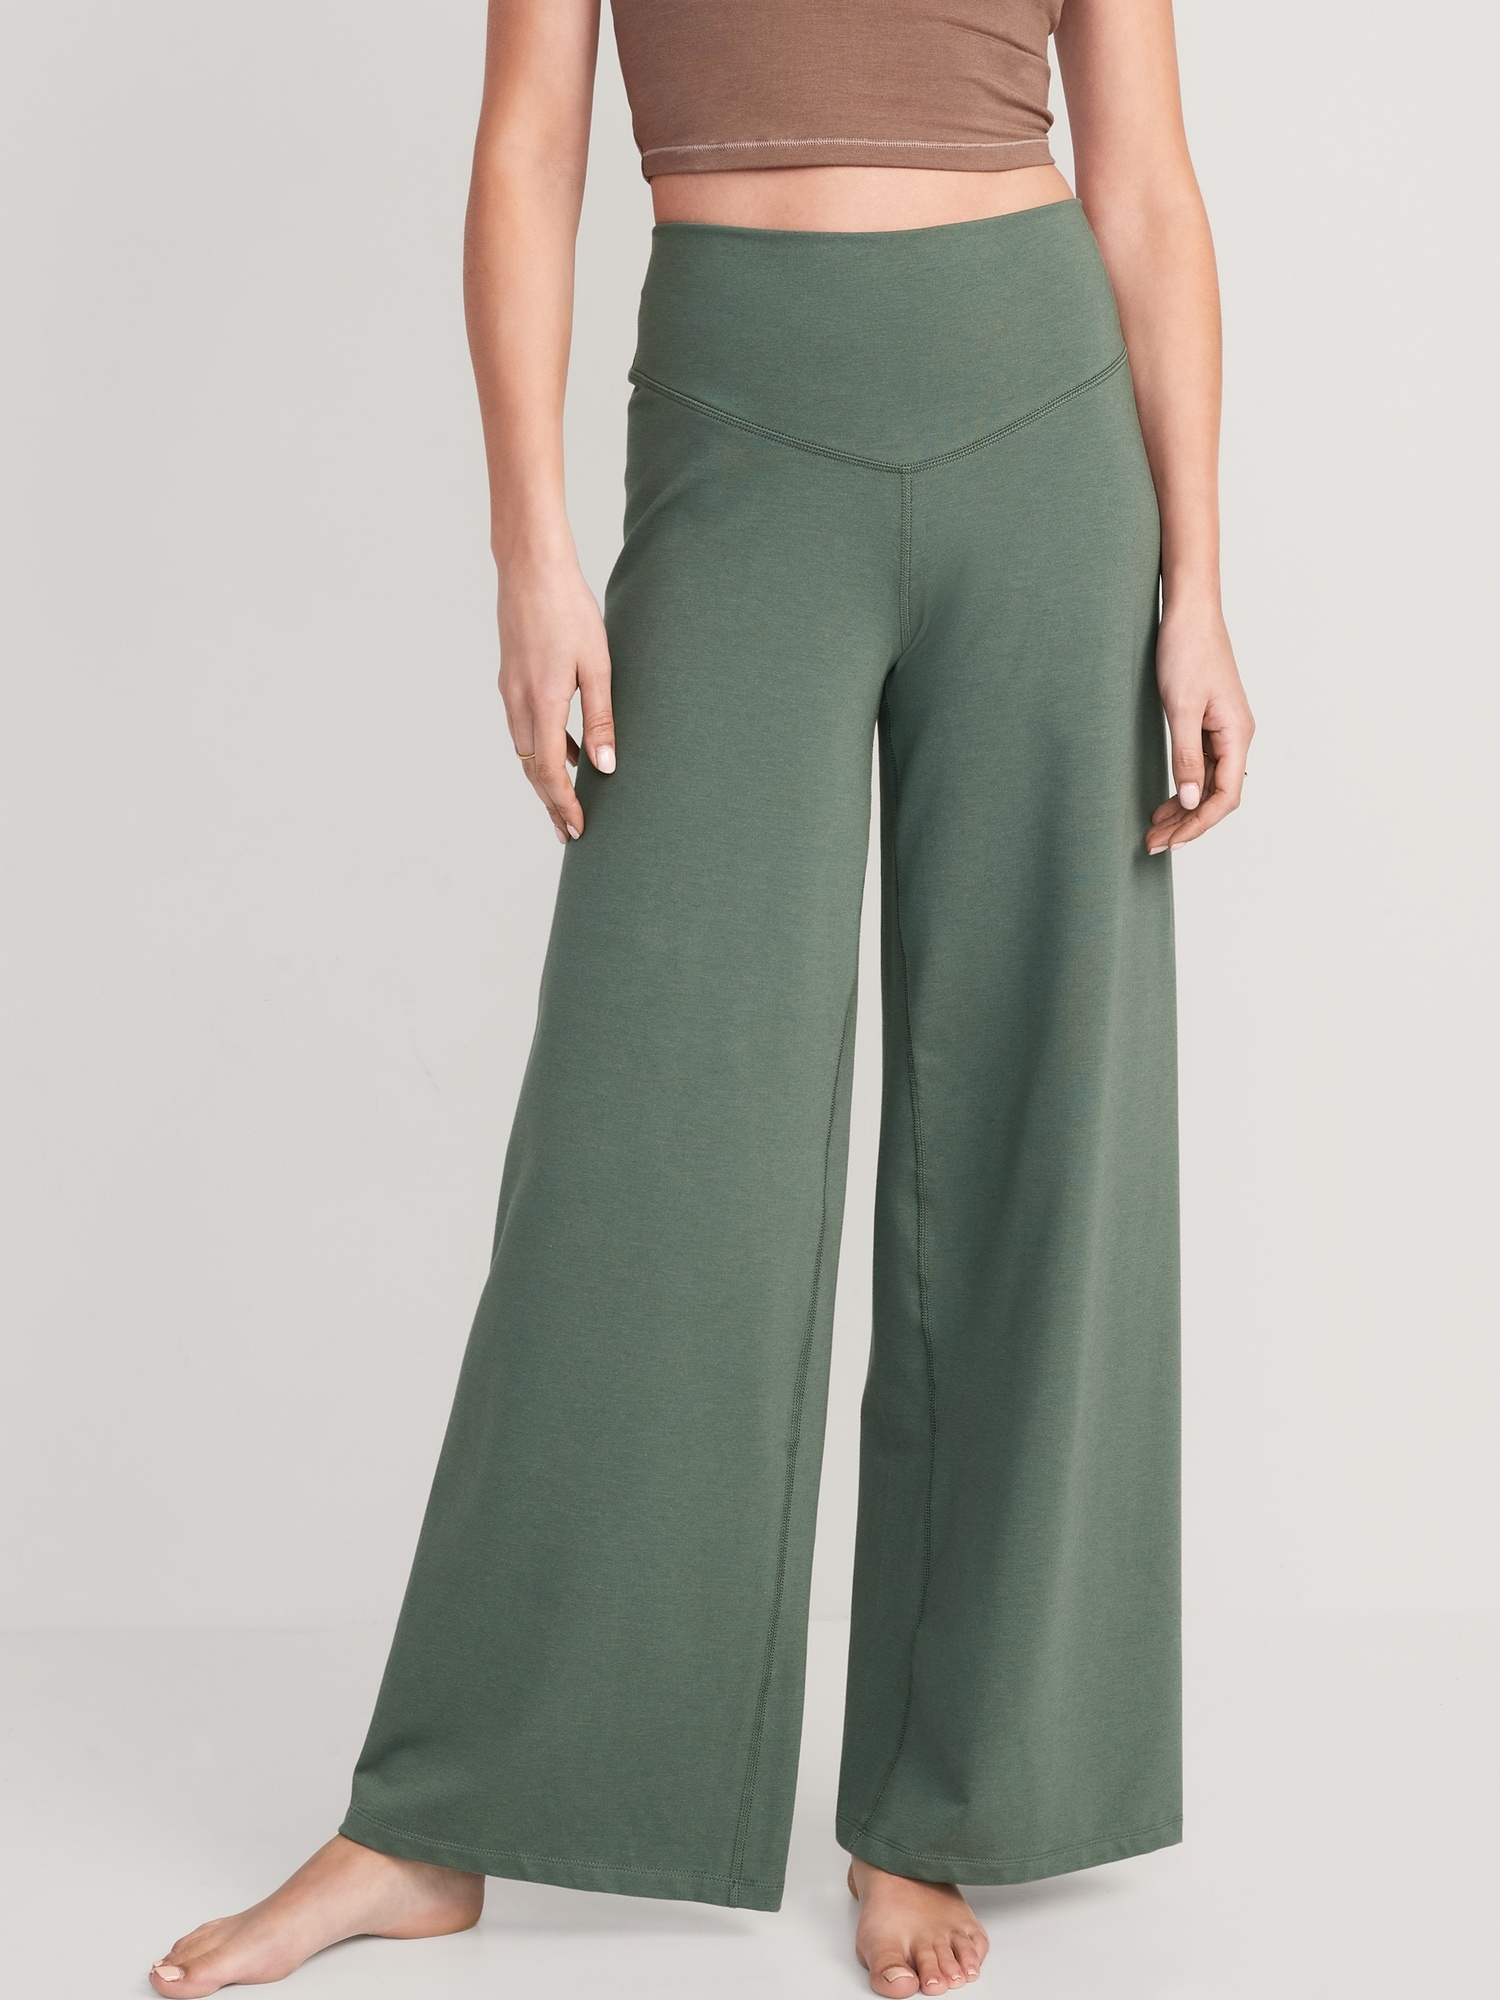 Old Navy Extra High-Waisted PowerChill Wide-Leg Yoga Pants for Women green. 1